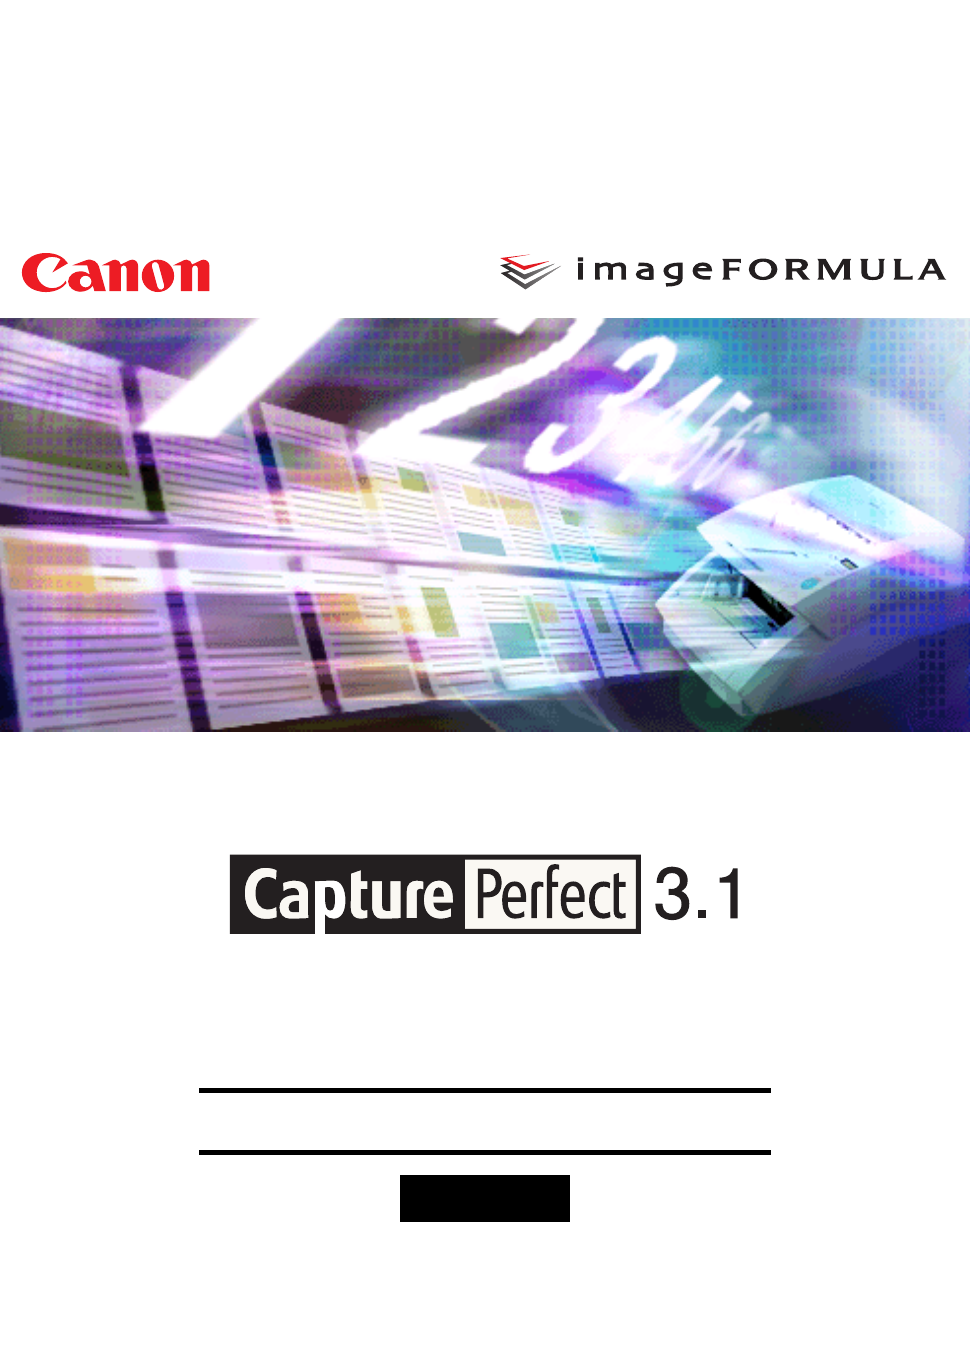 captureperfect 3.1 free download software